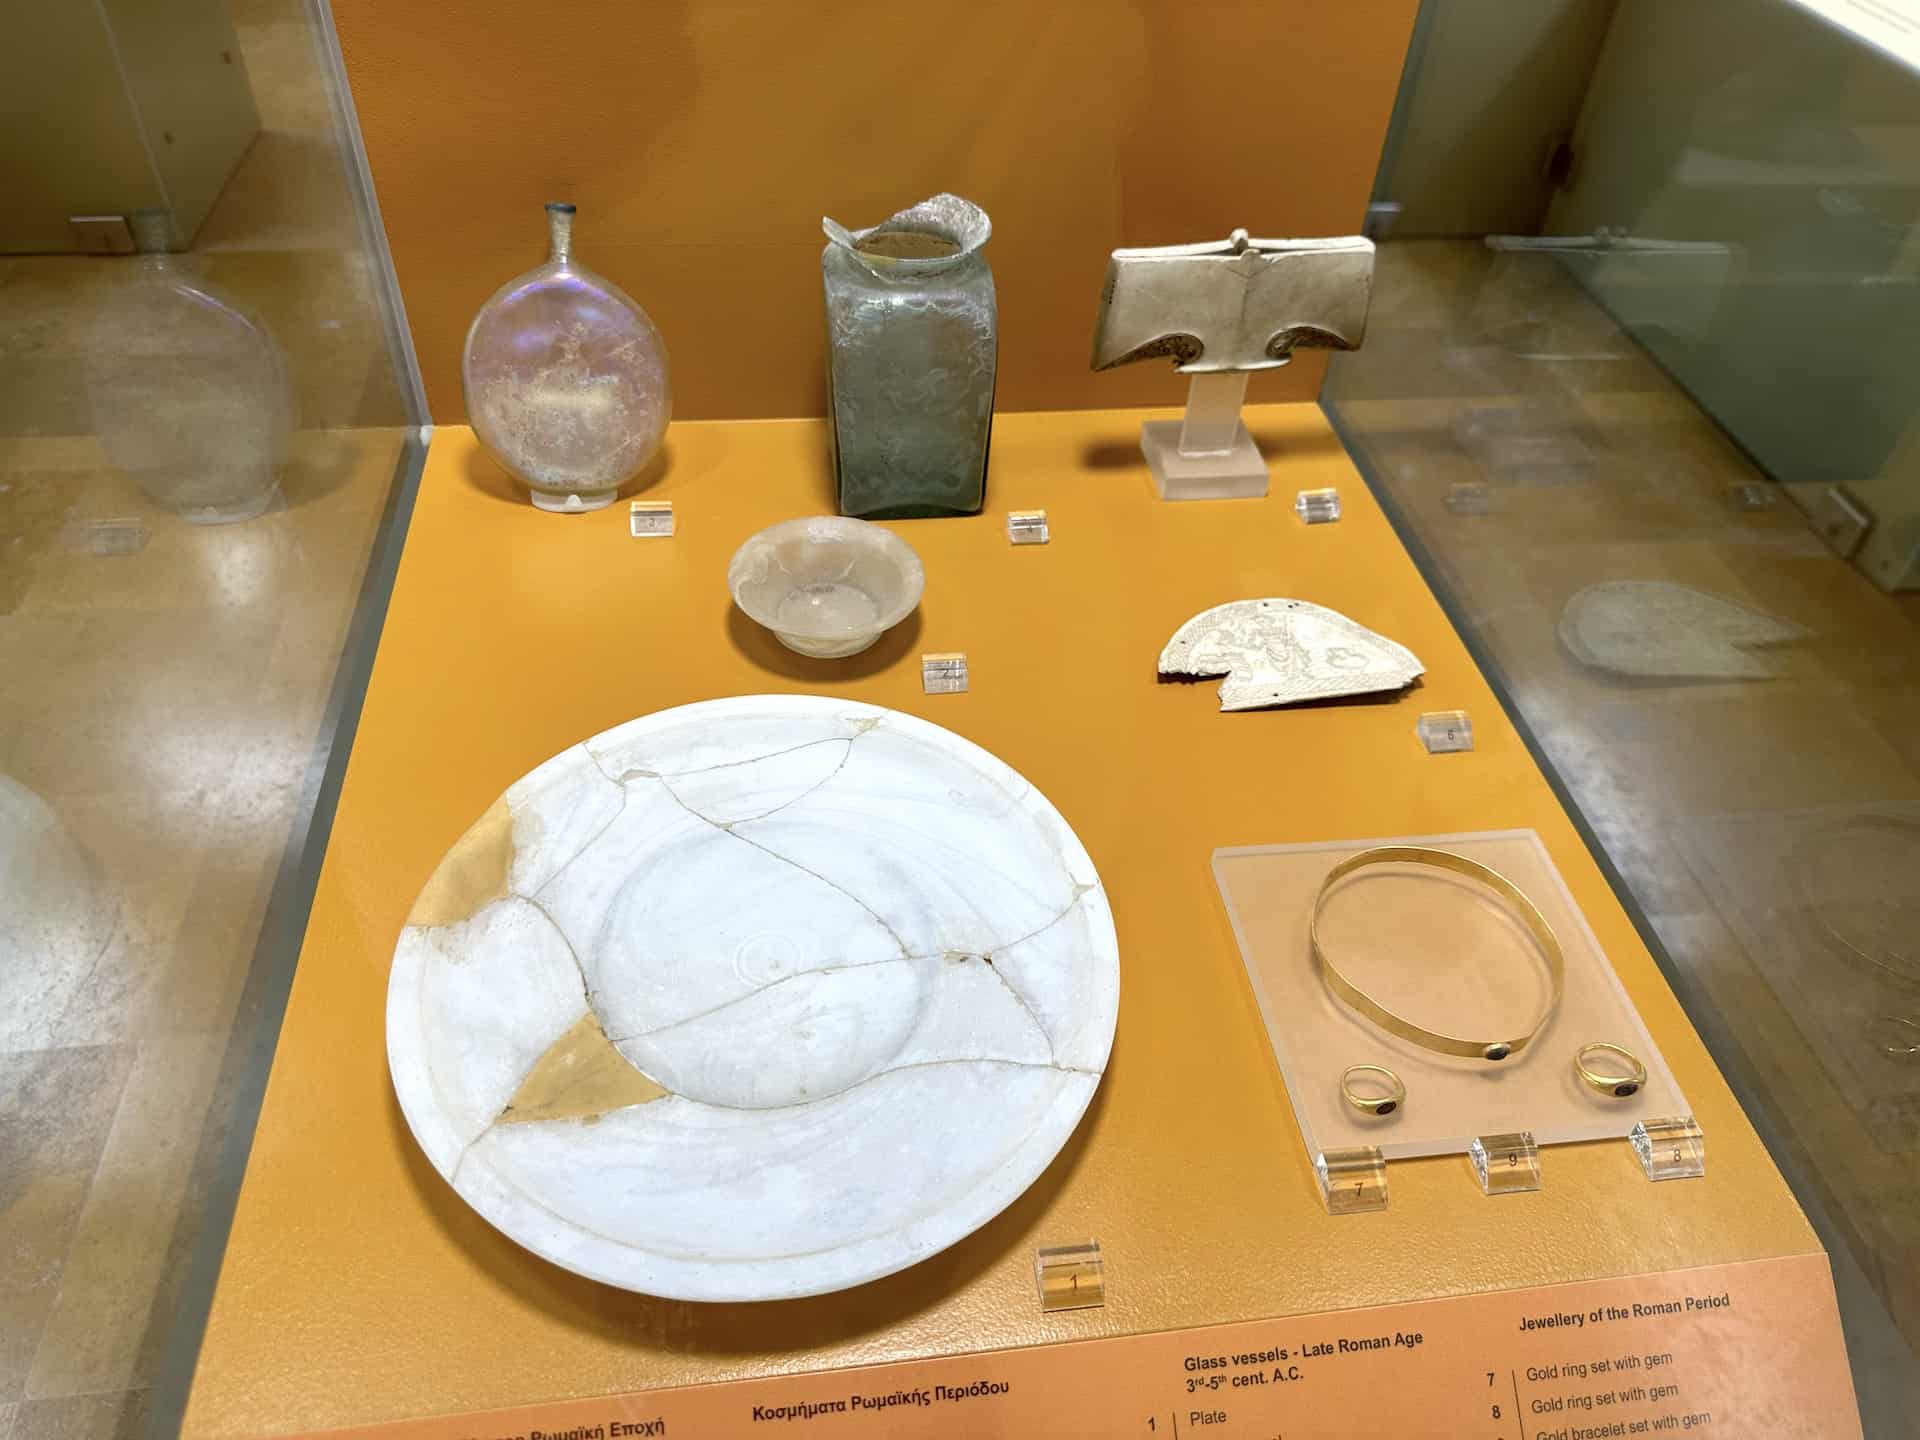 3rd-5th century glass vessels and jewelry of the Roman period